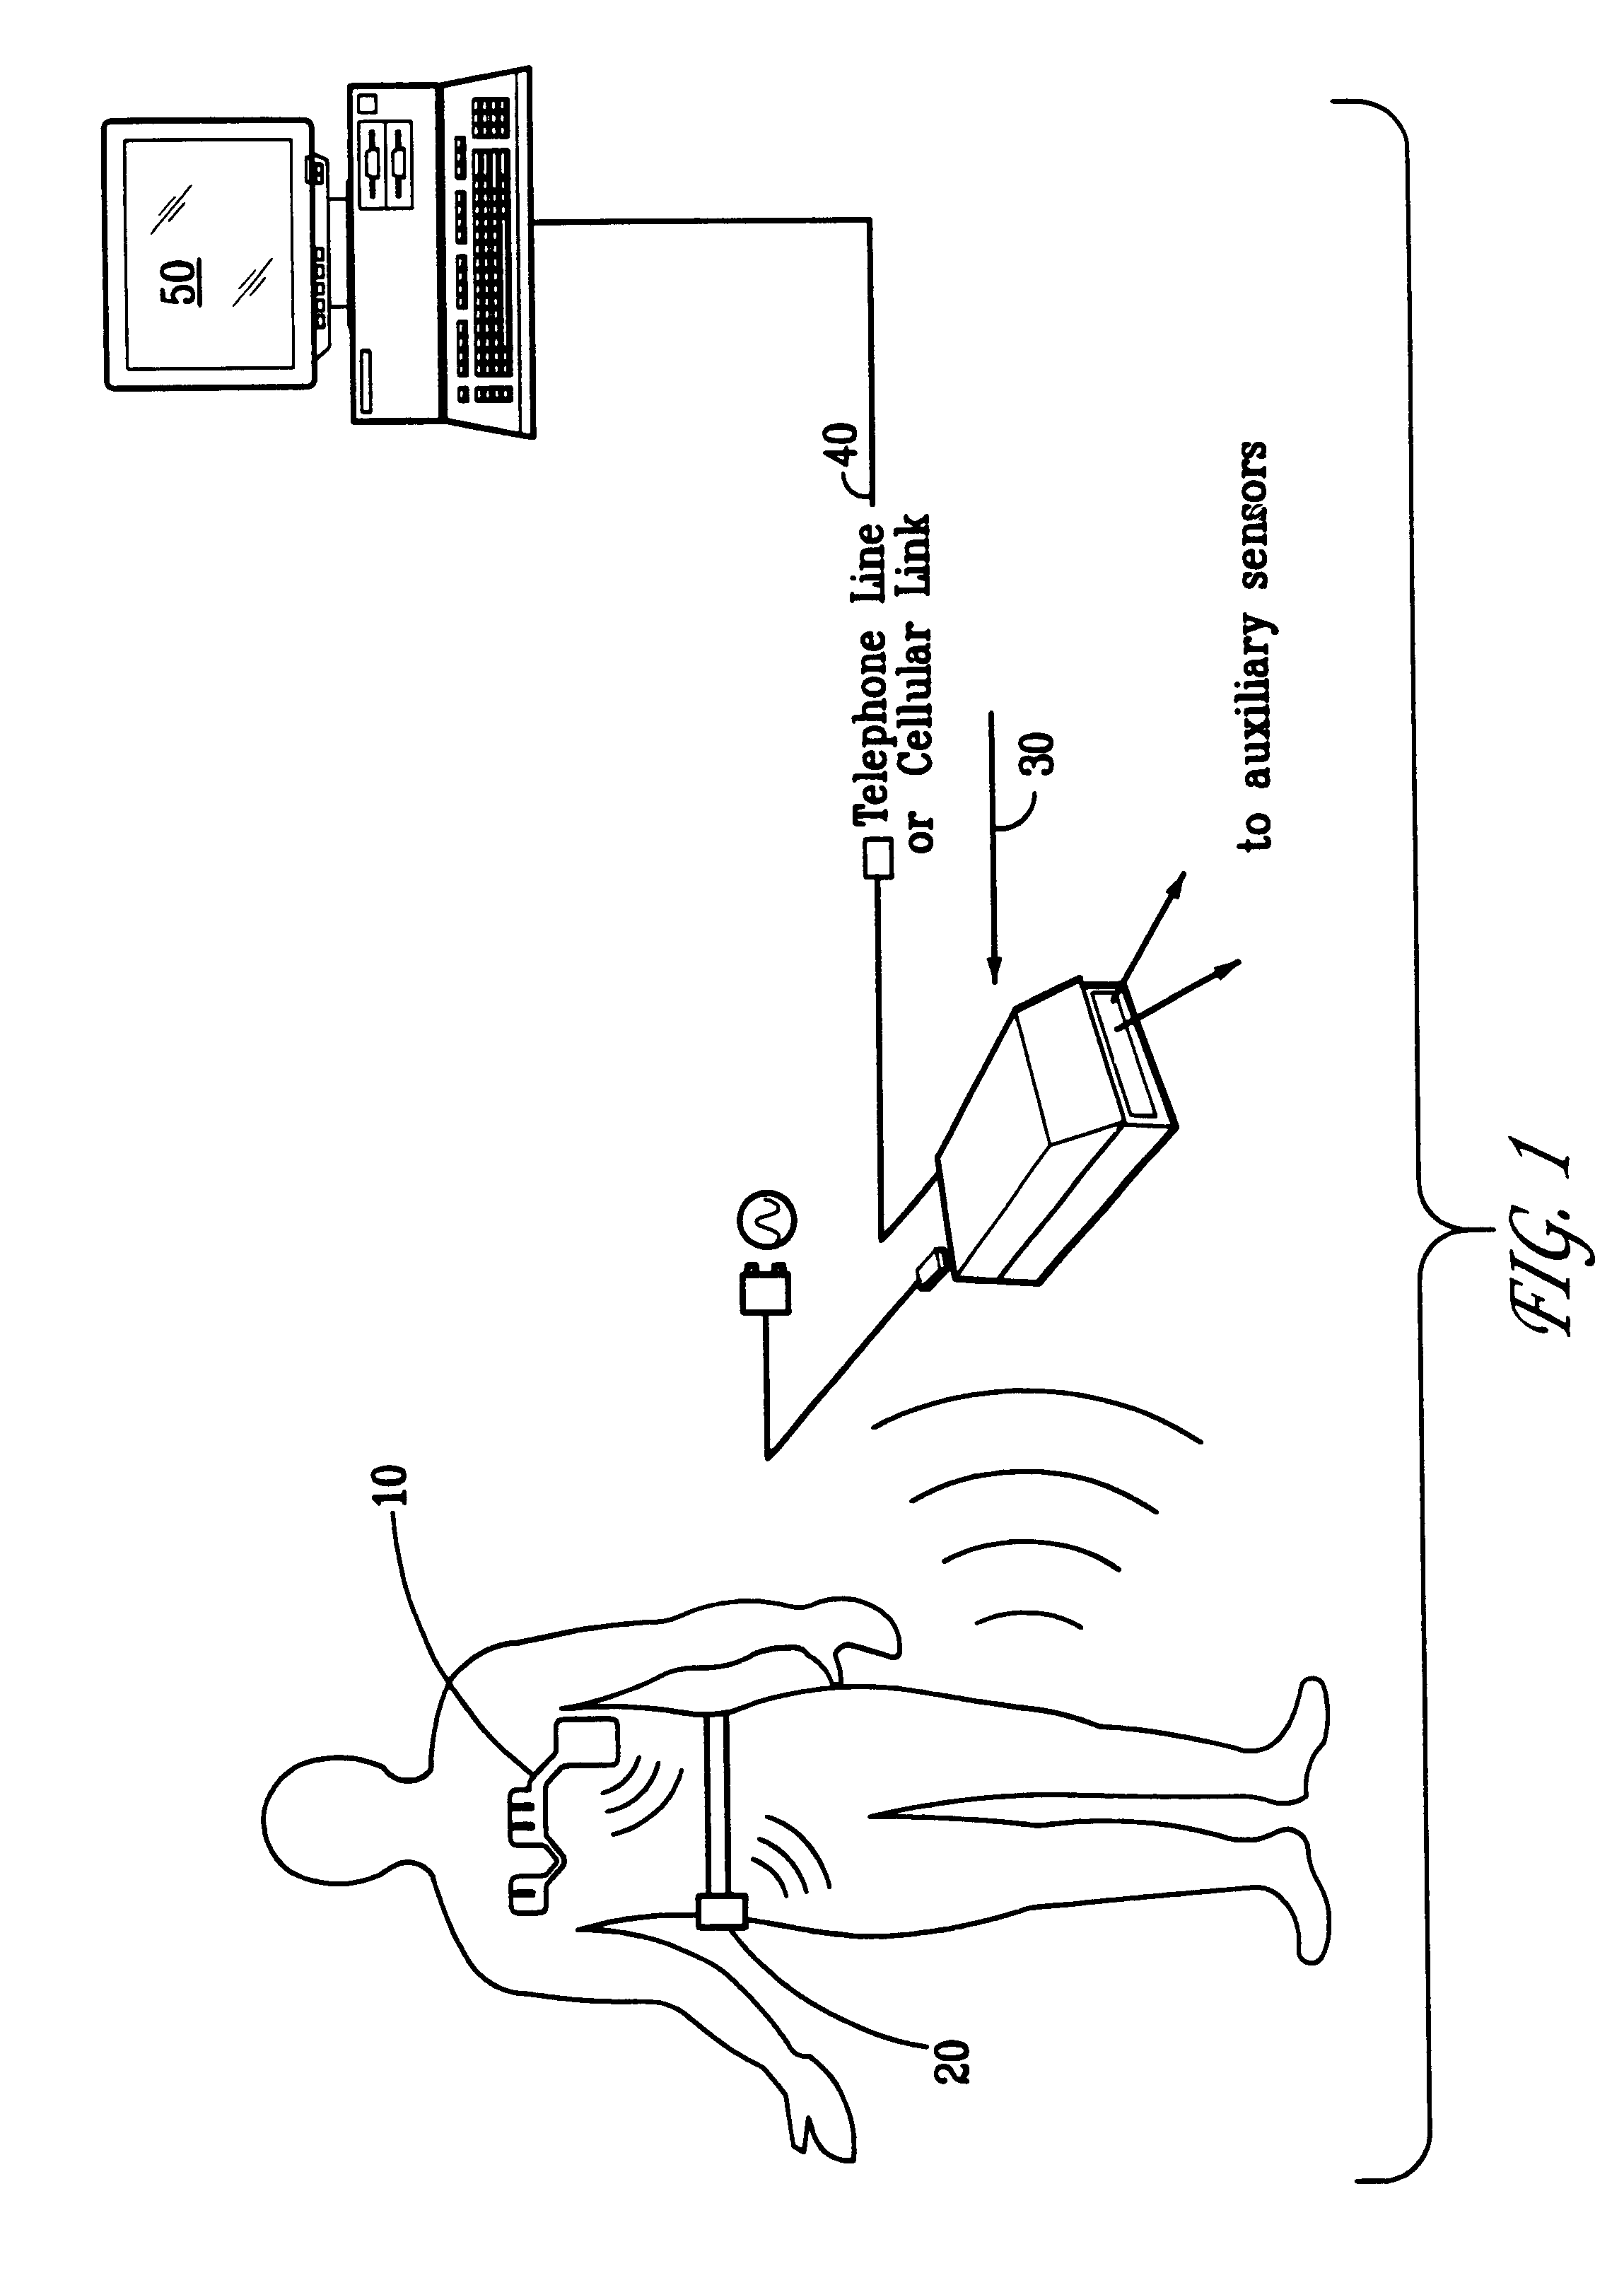 Portable remote patient telemonitoring system